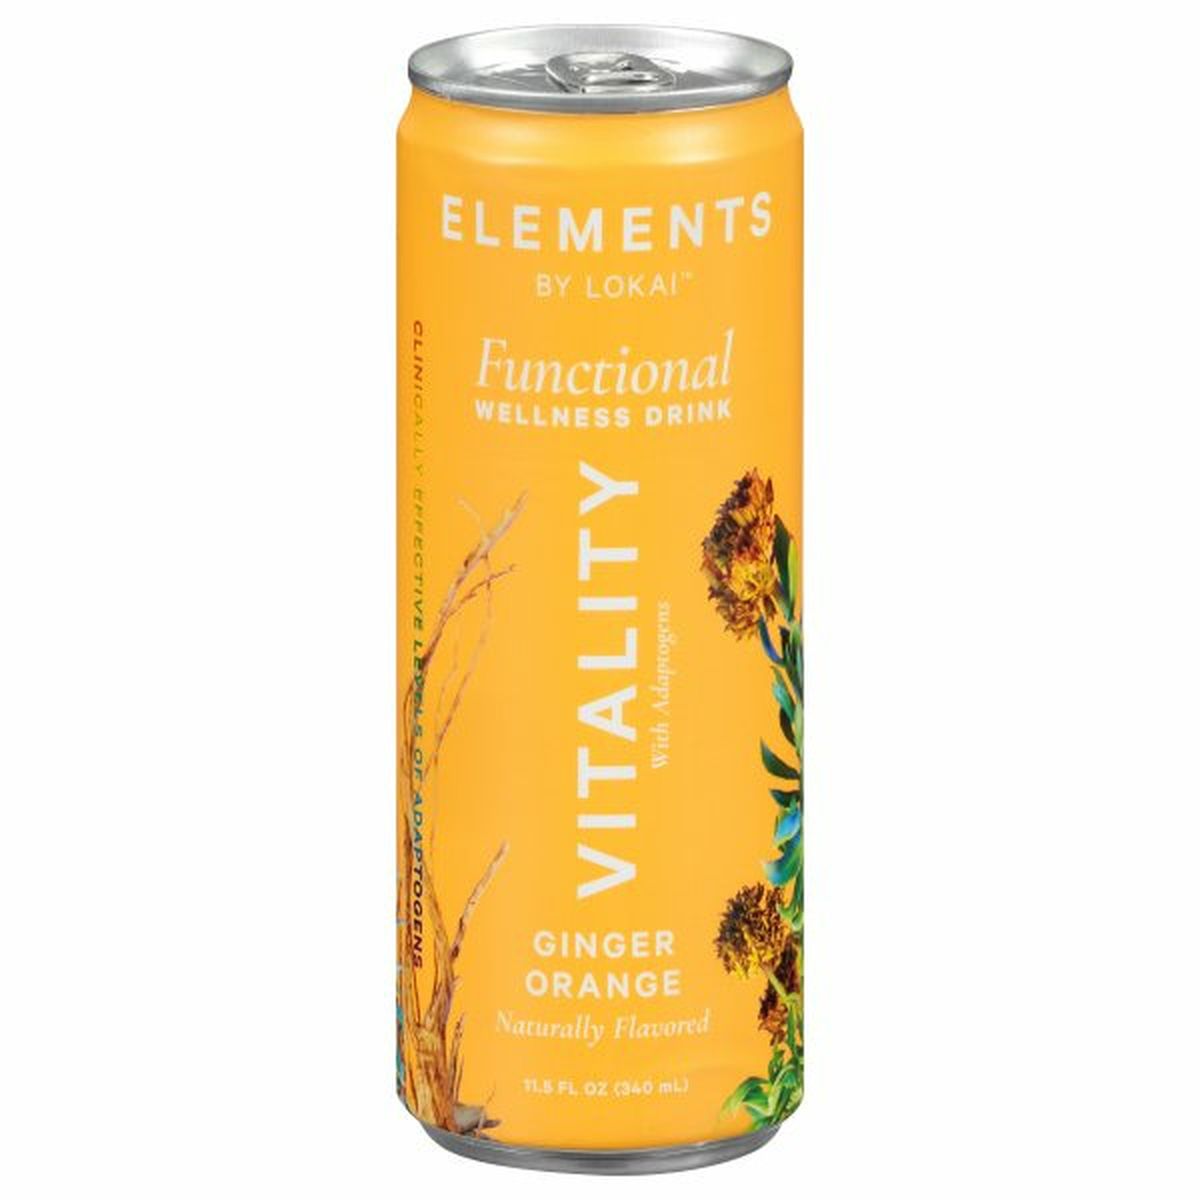 Calories in Elements By Lokai Functional Wellness Drink, Ginger Orange, Vitality